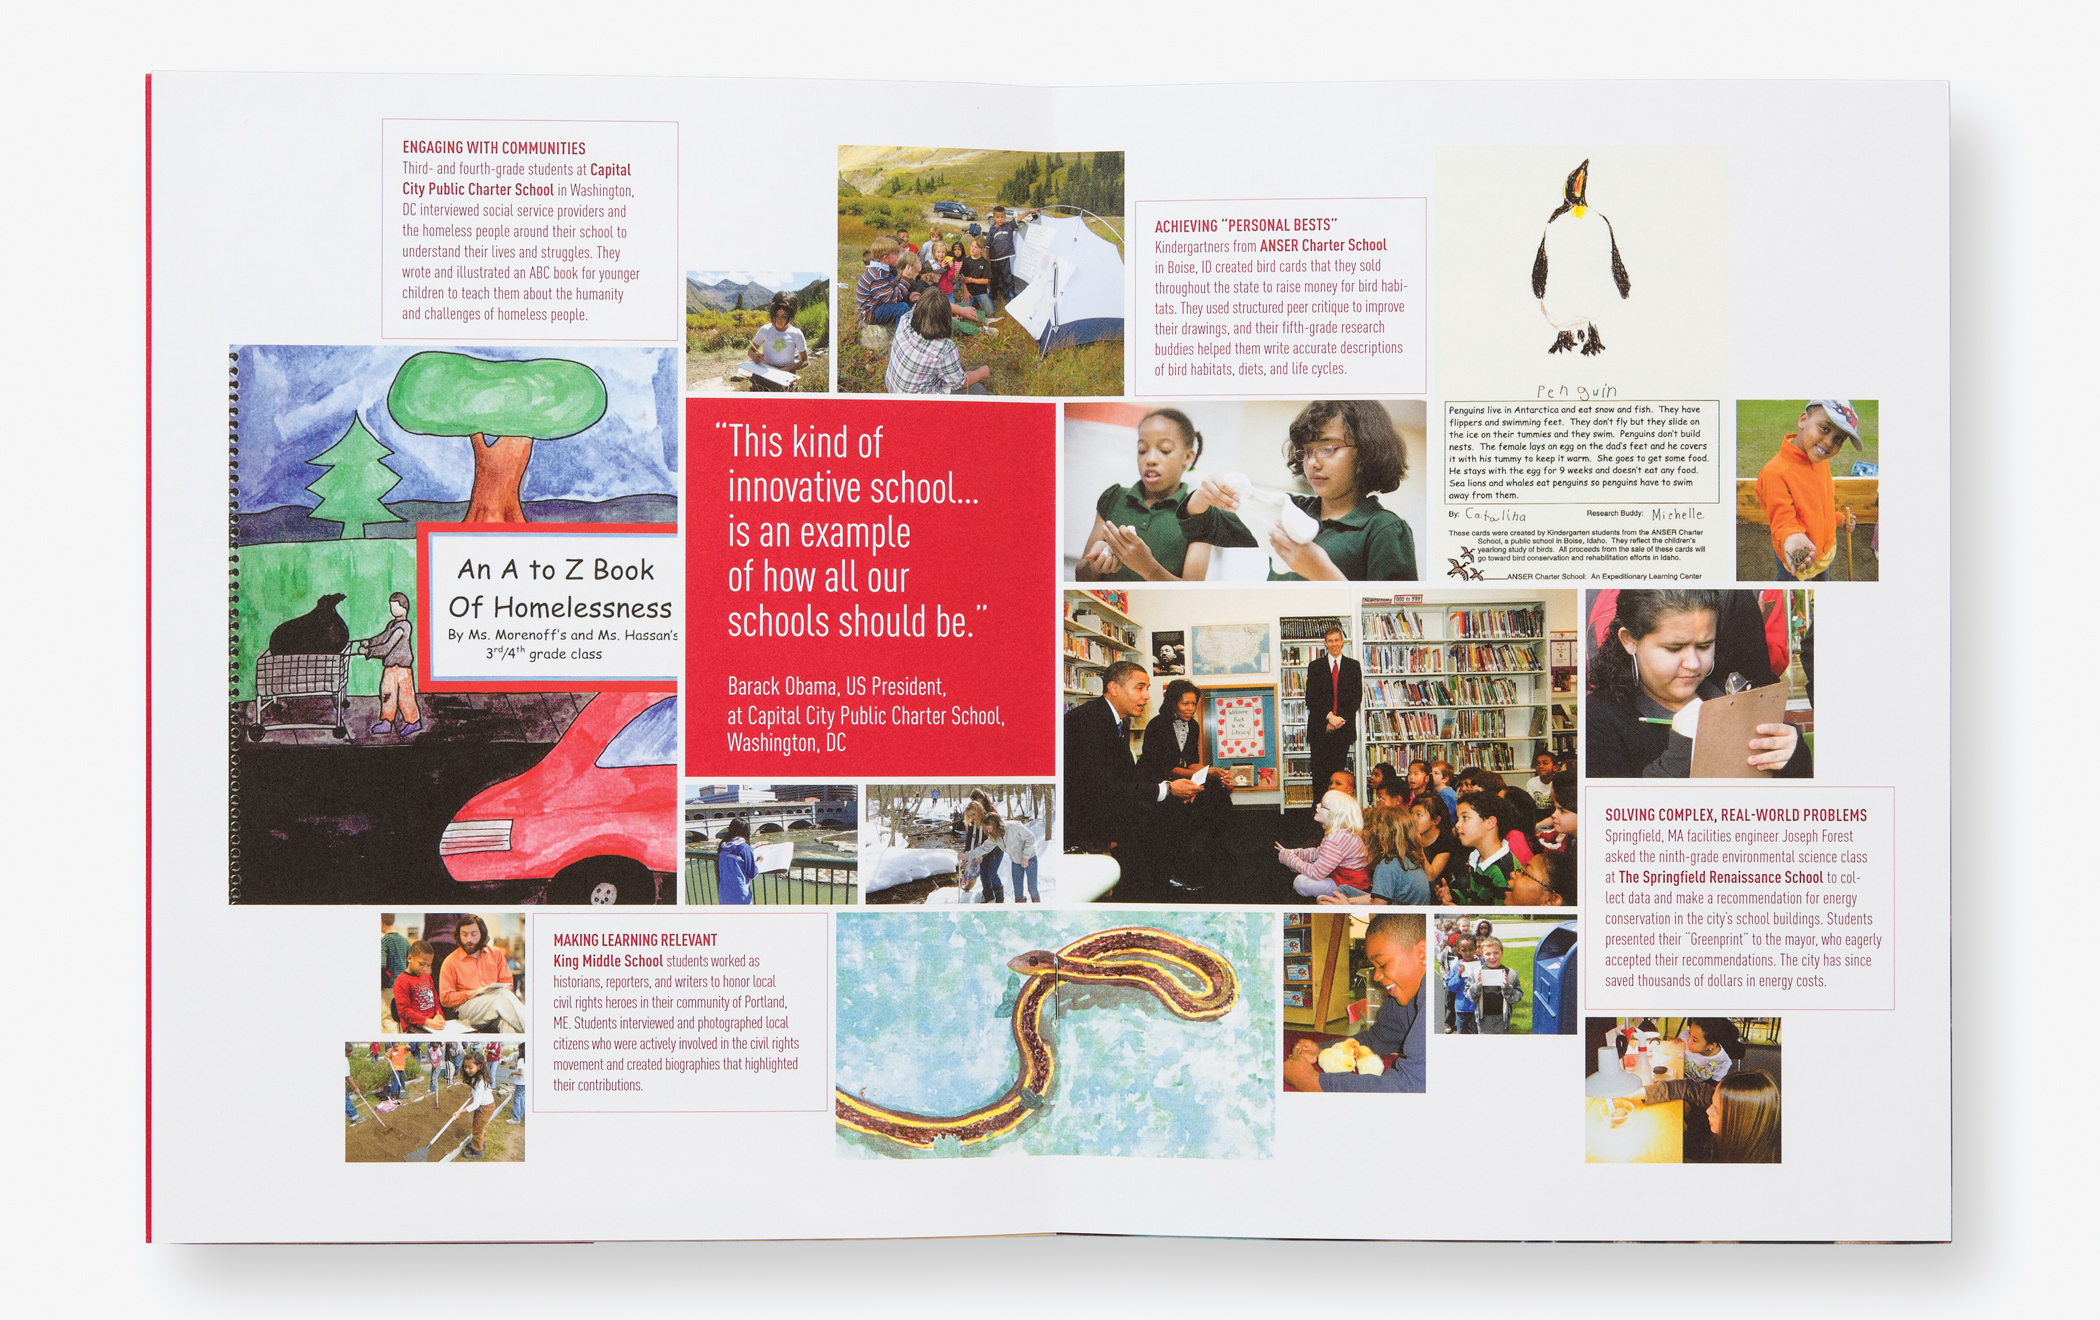 Pages from the Expeditionary Learning image brochure showing a collage of student and teacher photos and learning materials.